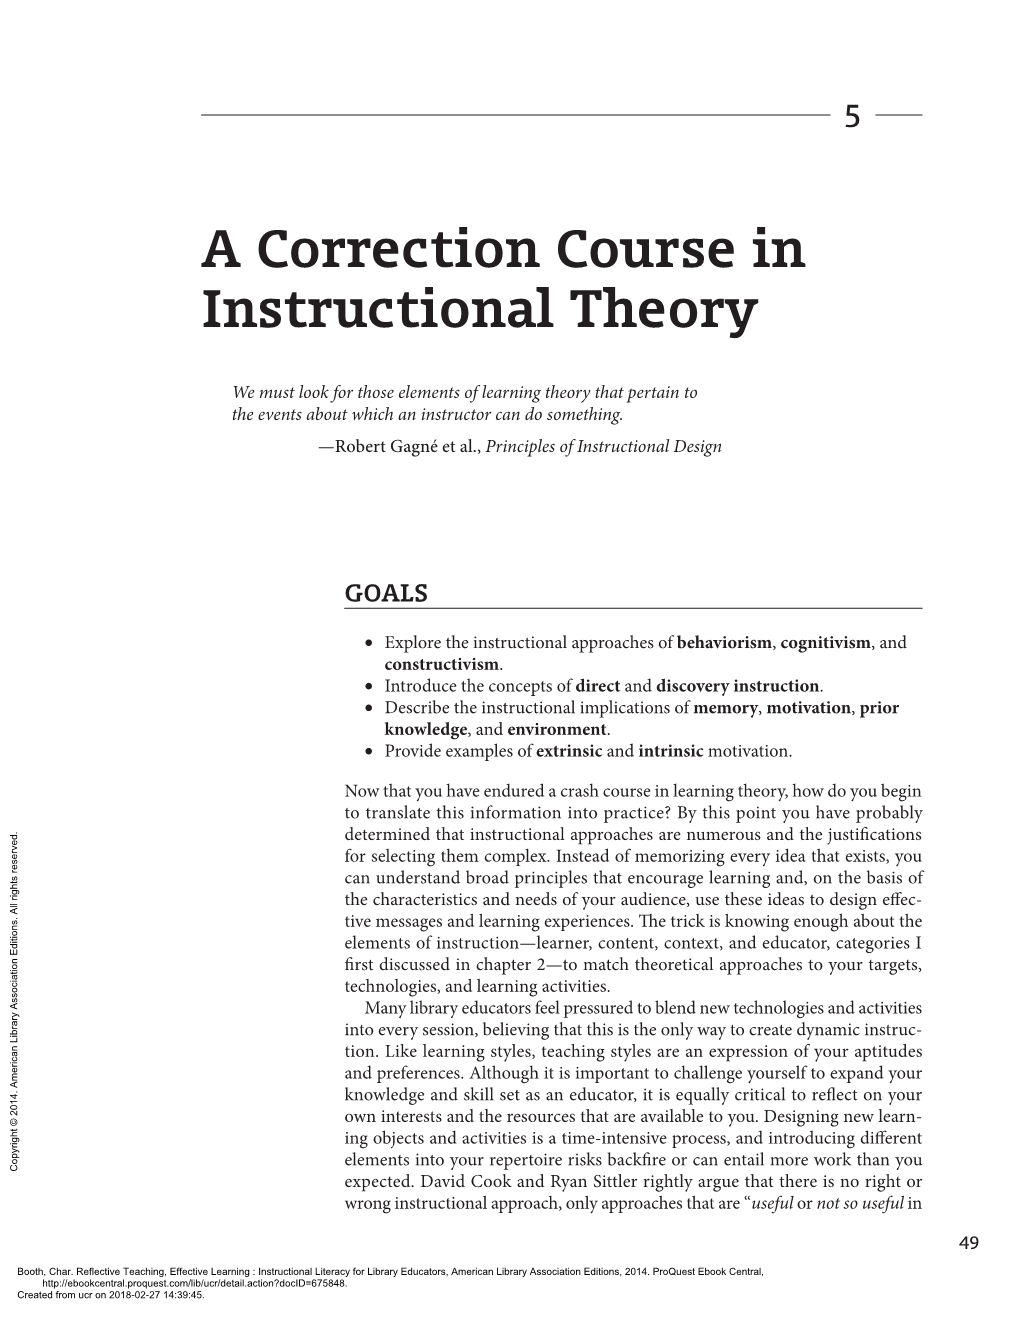 A Correction Course in Instructional Theory